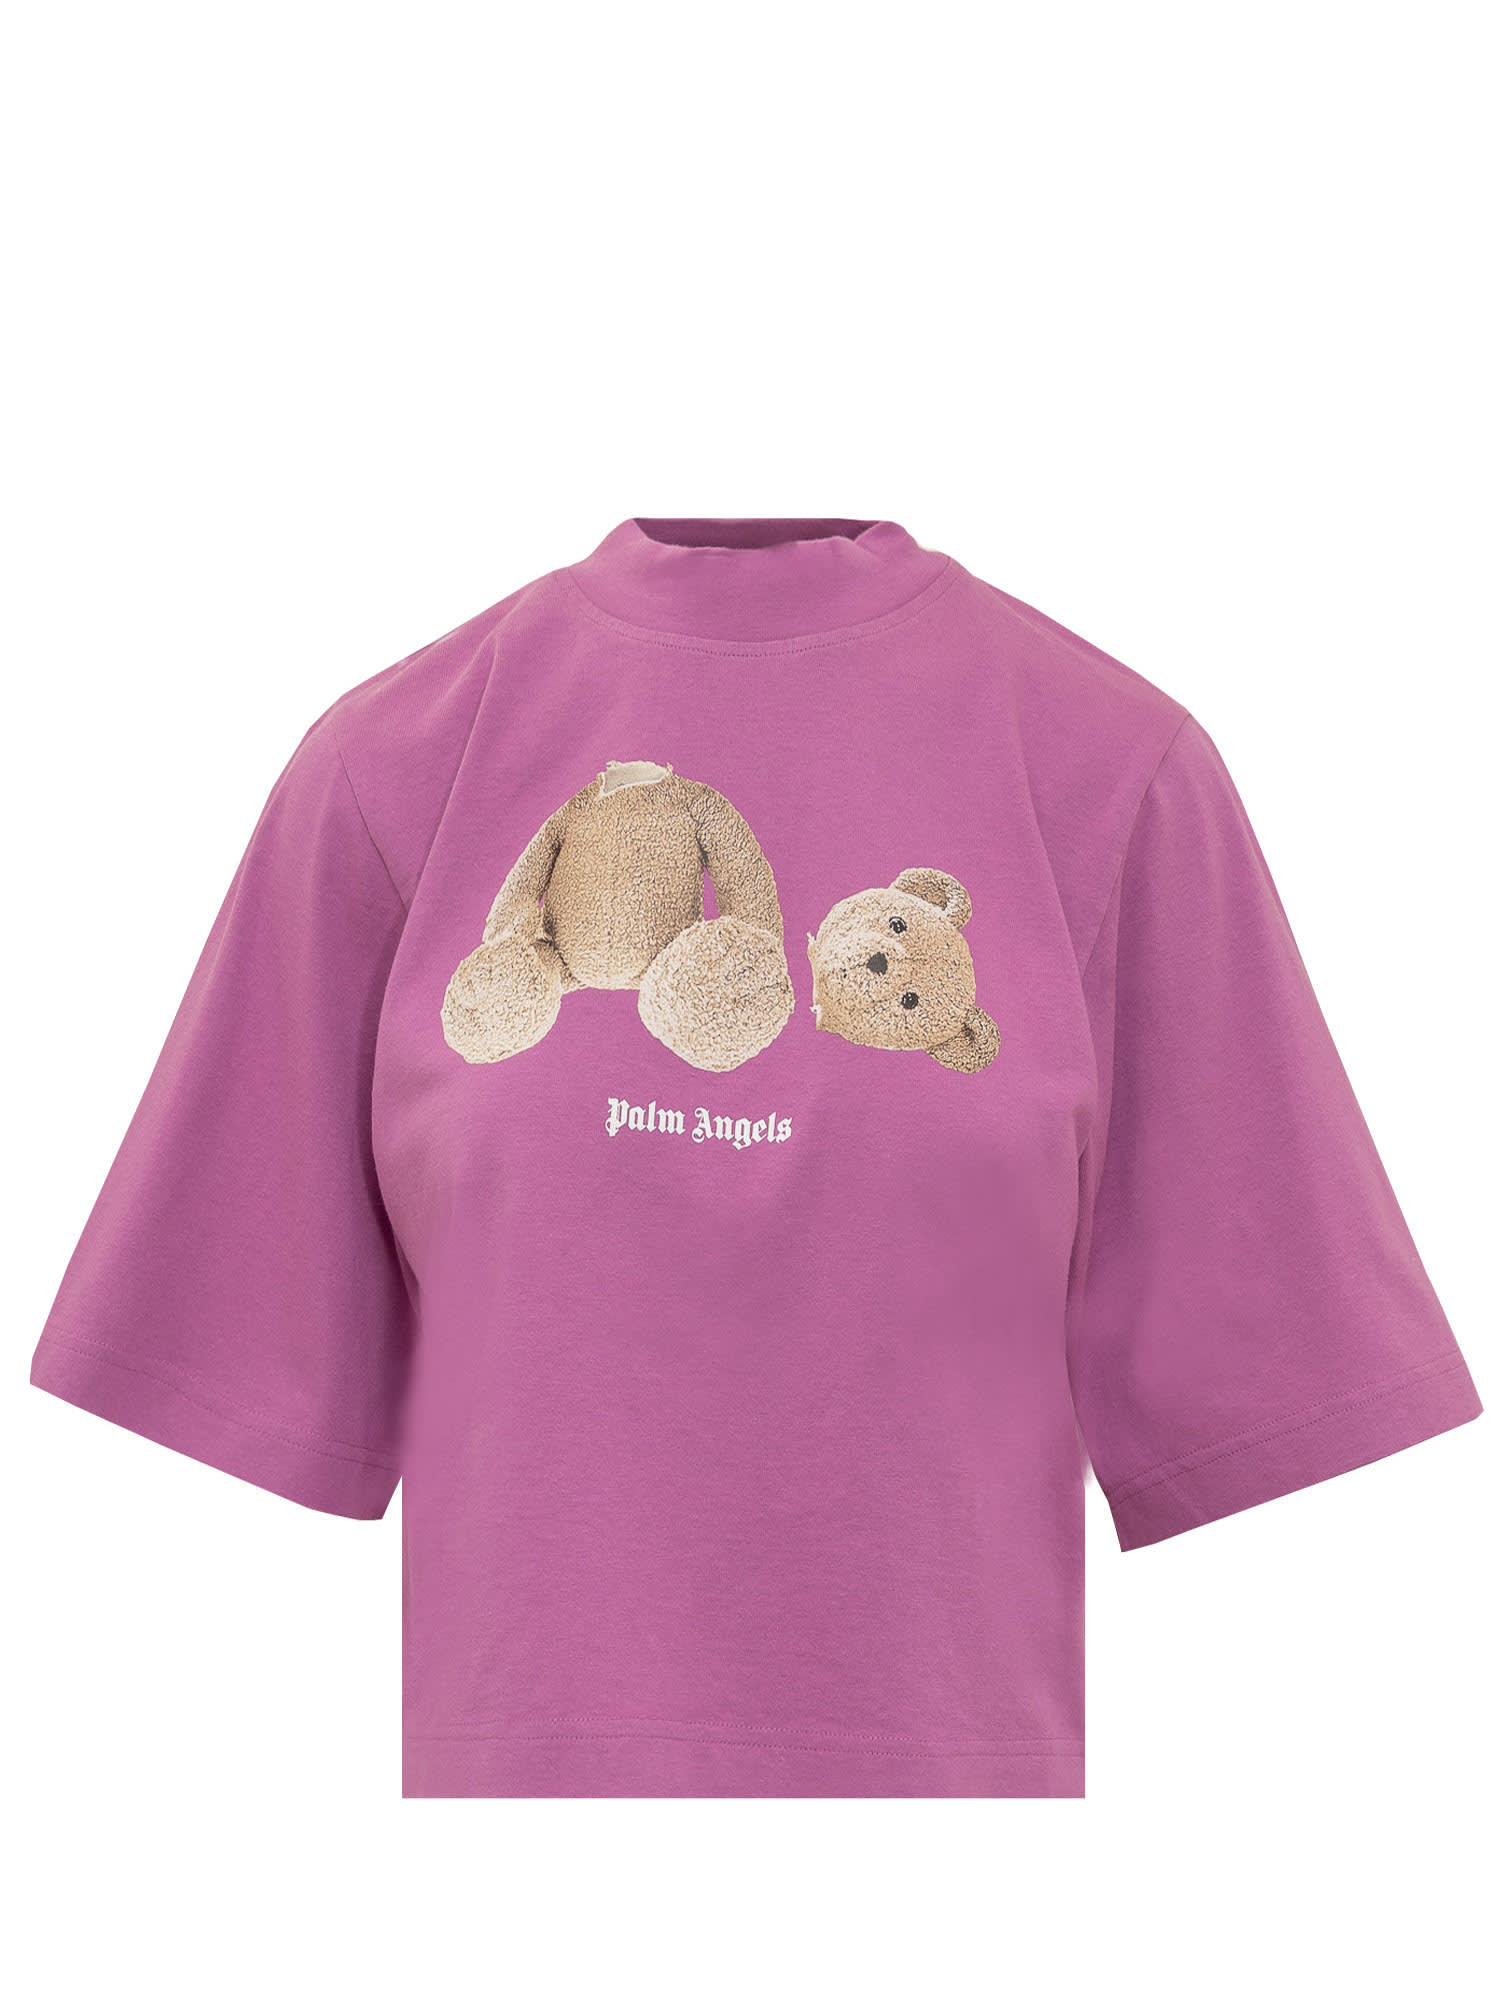 PALM ANGELS CROPPED T-SHIRT WITH BEAR